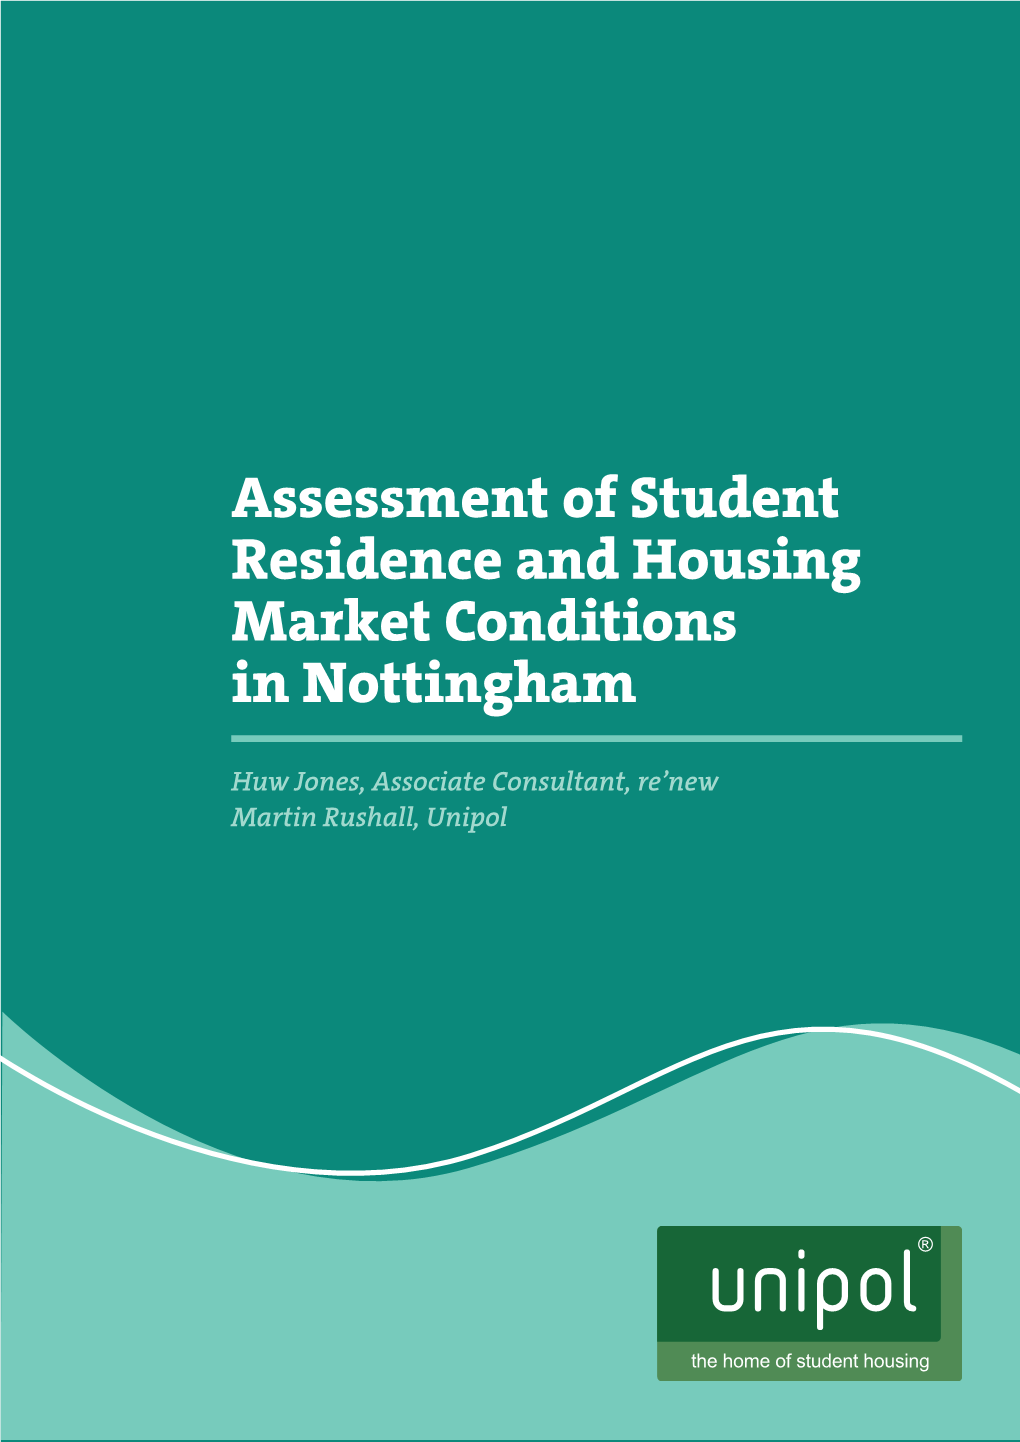 Assessment of Student Residence and Housing Market Conditions in Nottingham